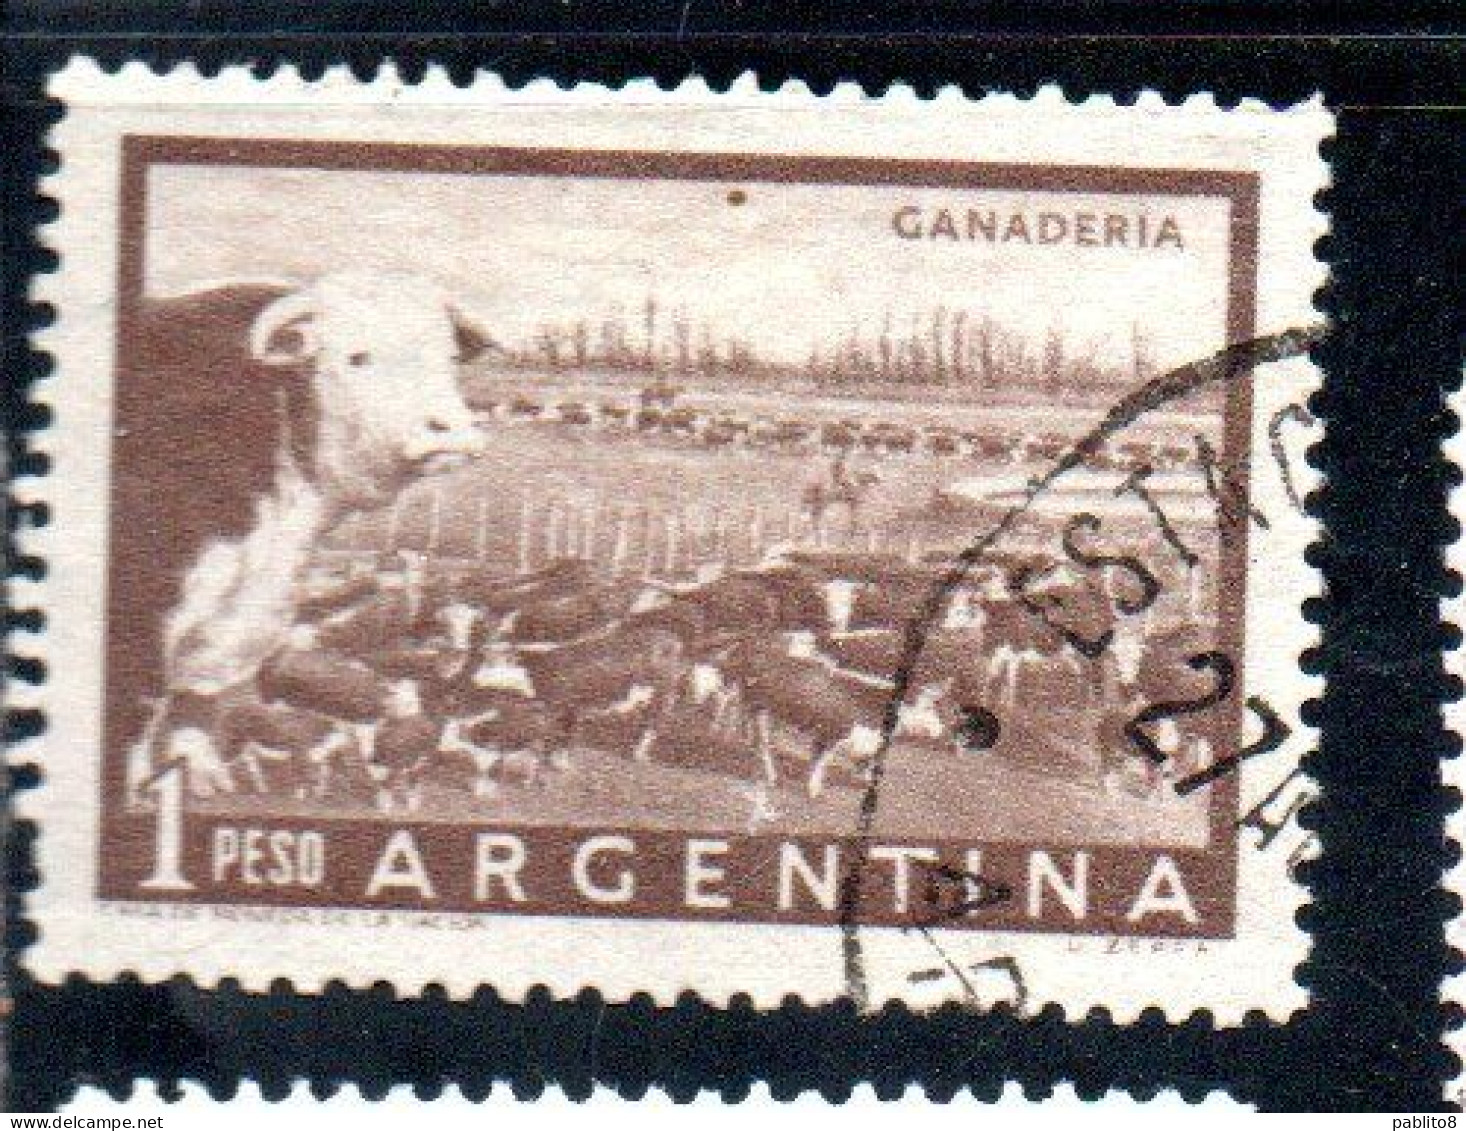 ARGENTINA 1954 1959 1958 CATTLE RANCH GANADERIA 1p USED USADO OBLITERE' - Used Stamps